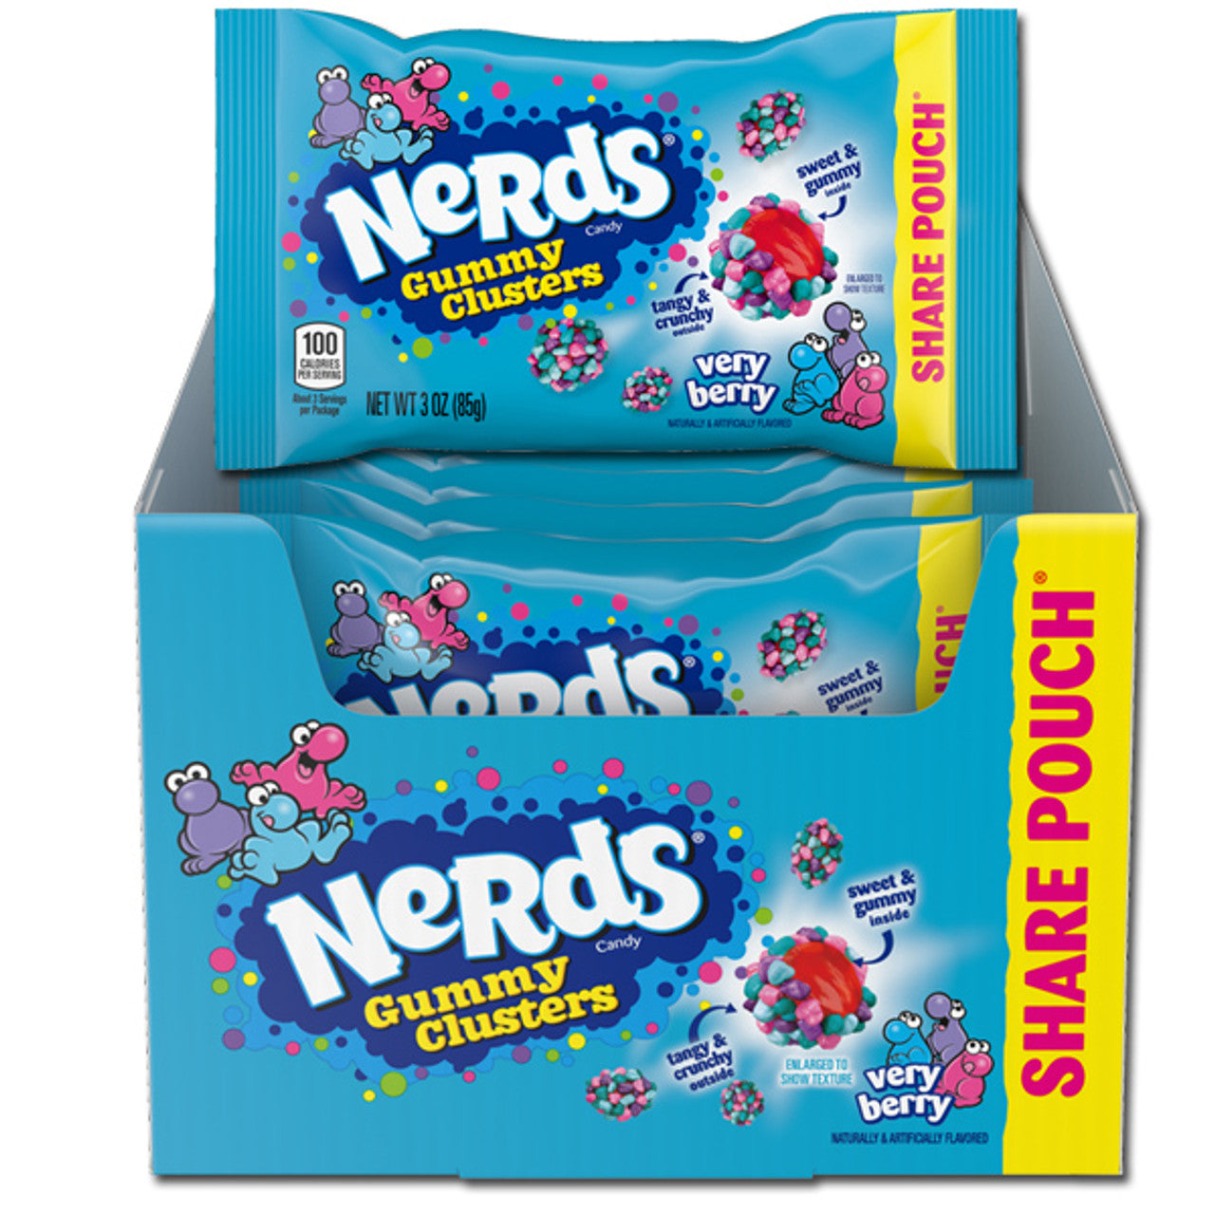 Nerds Clusters Very Berry Box 3oz - 12ct